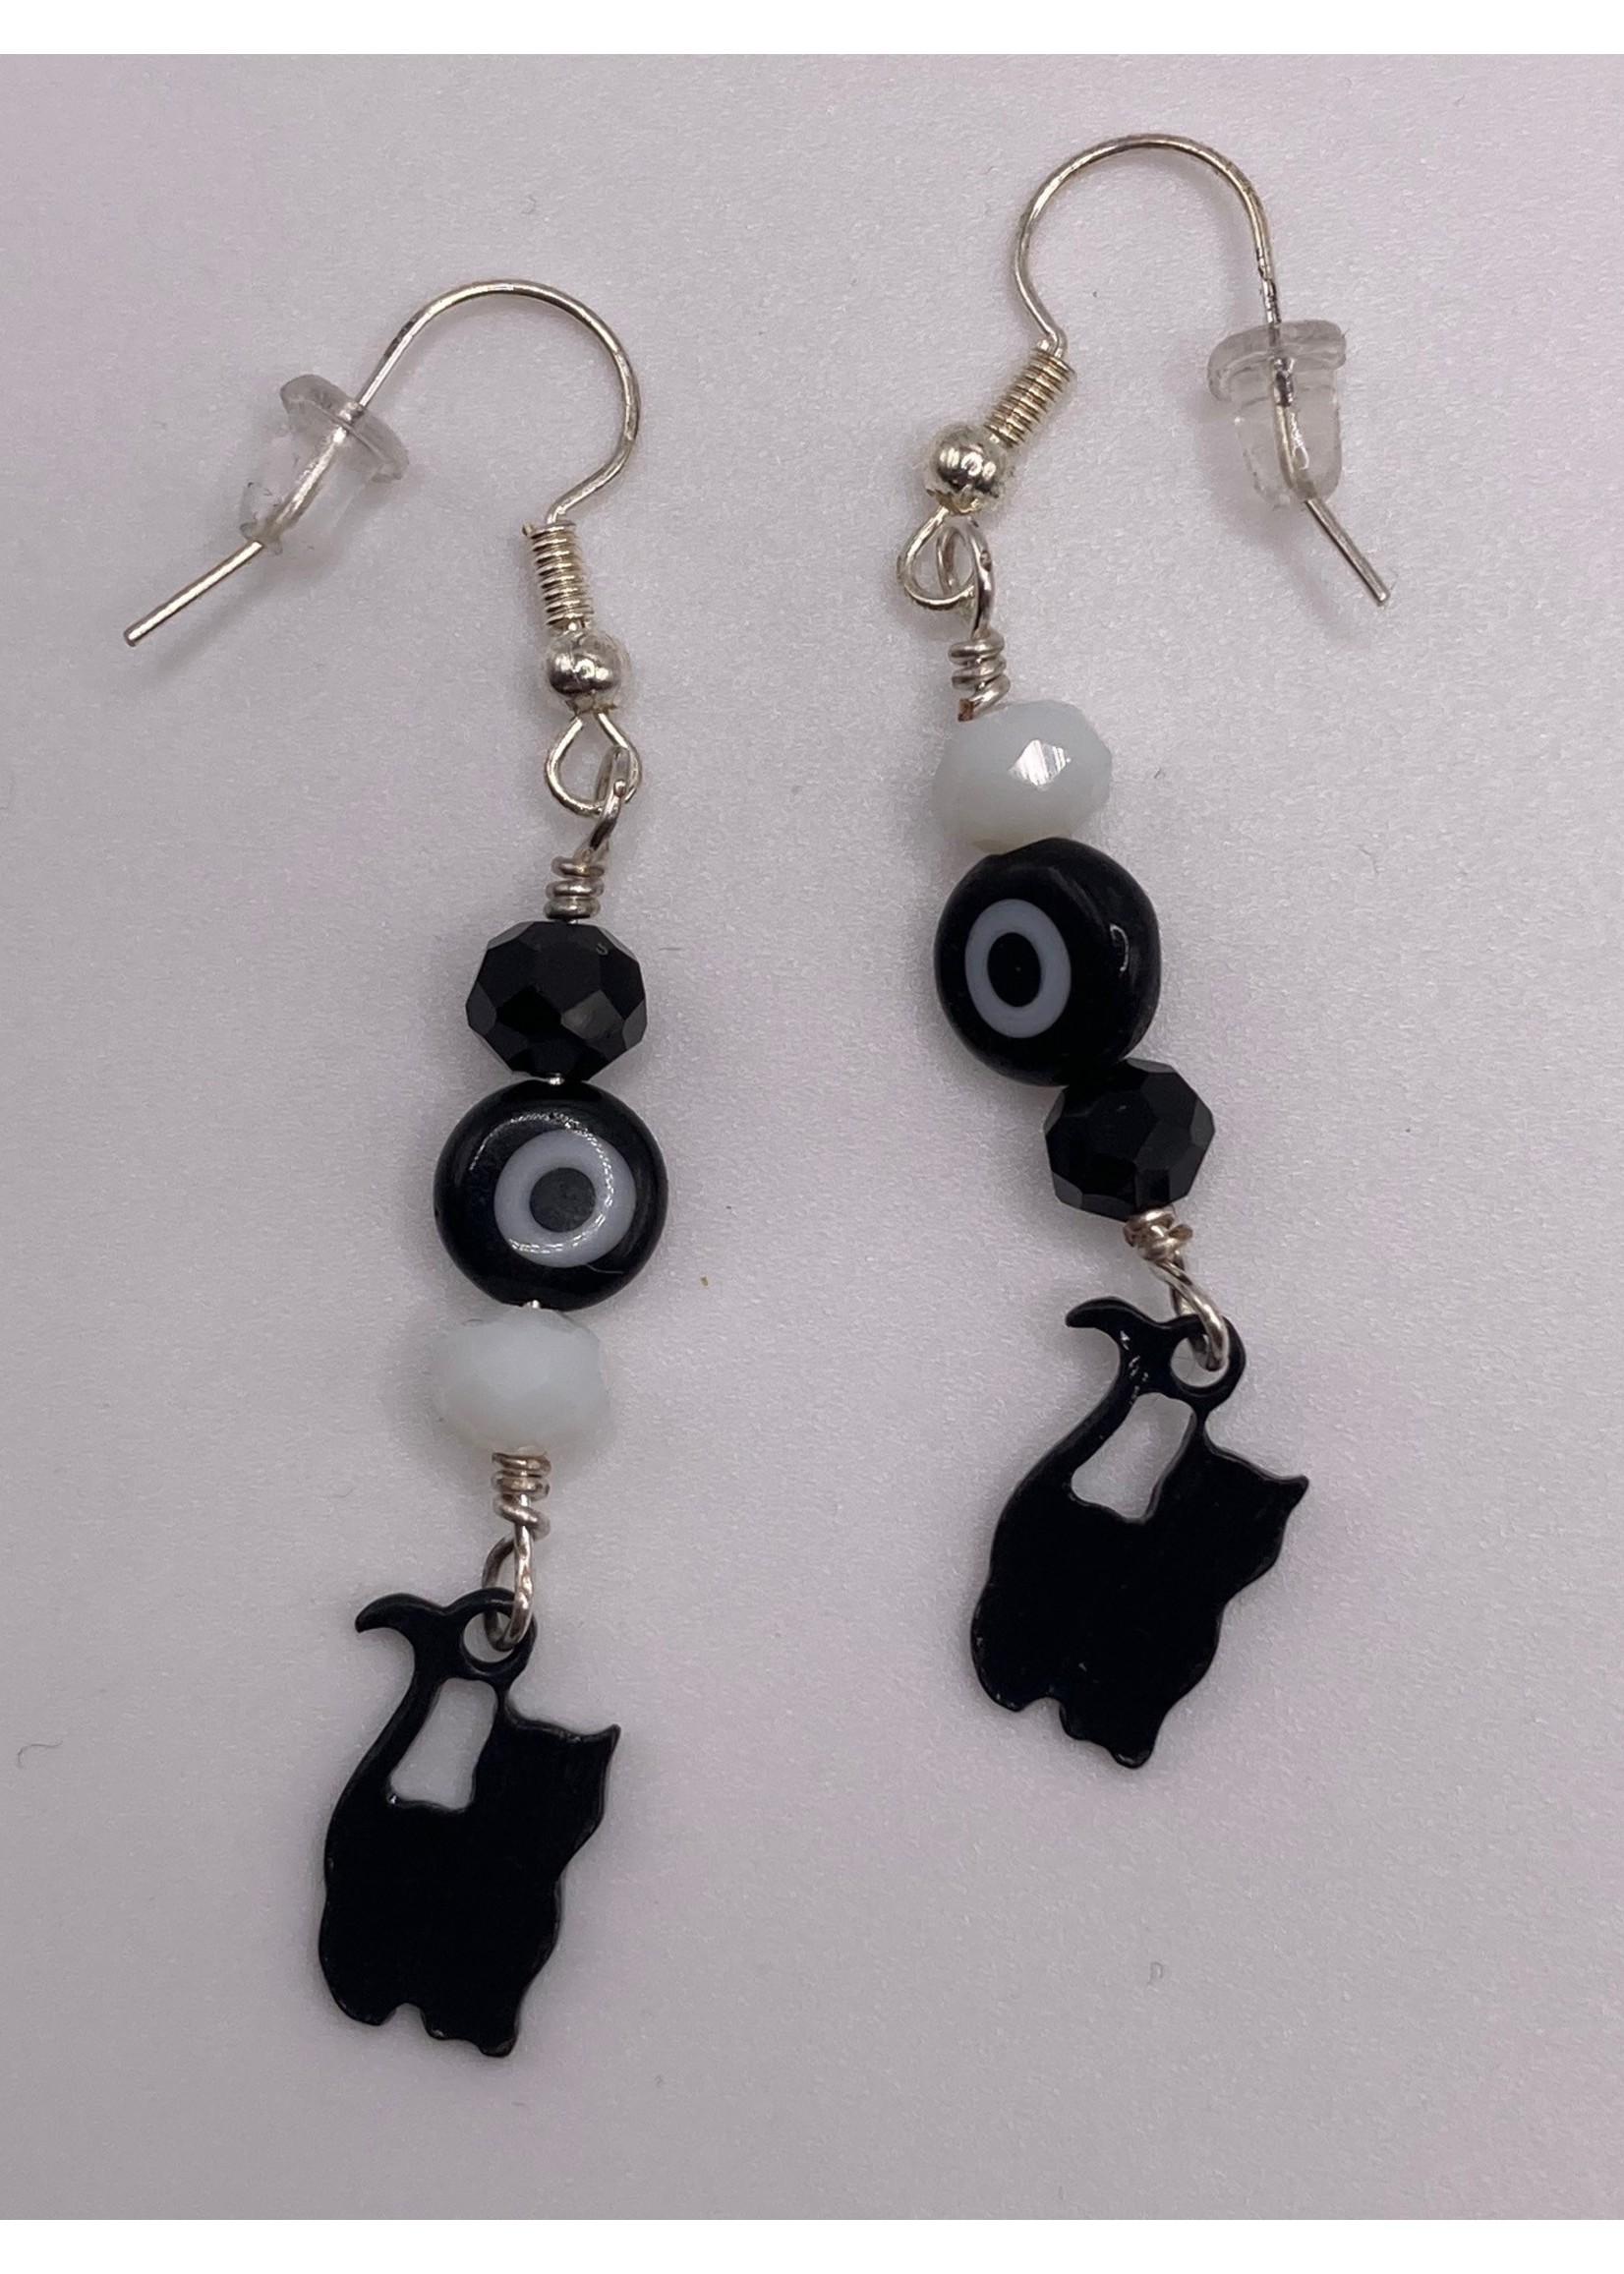 Our Twisted Dahlia Black Cat with Evil Eye Earrings